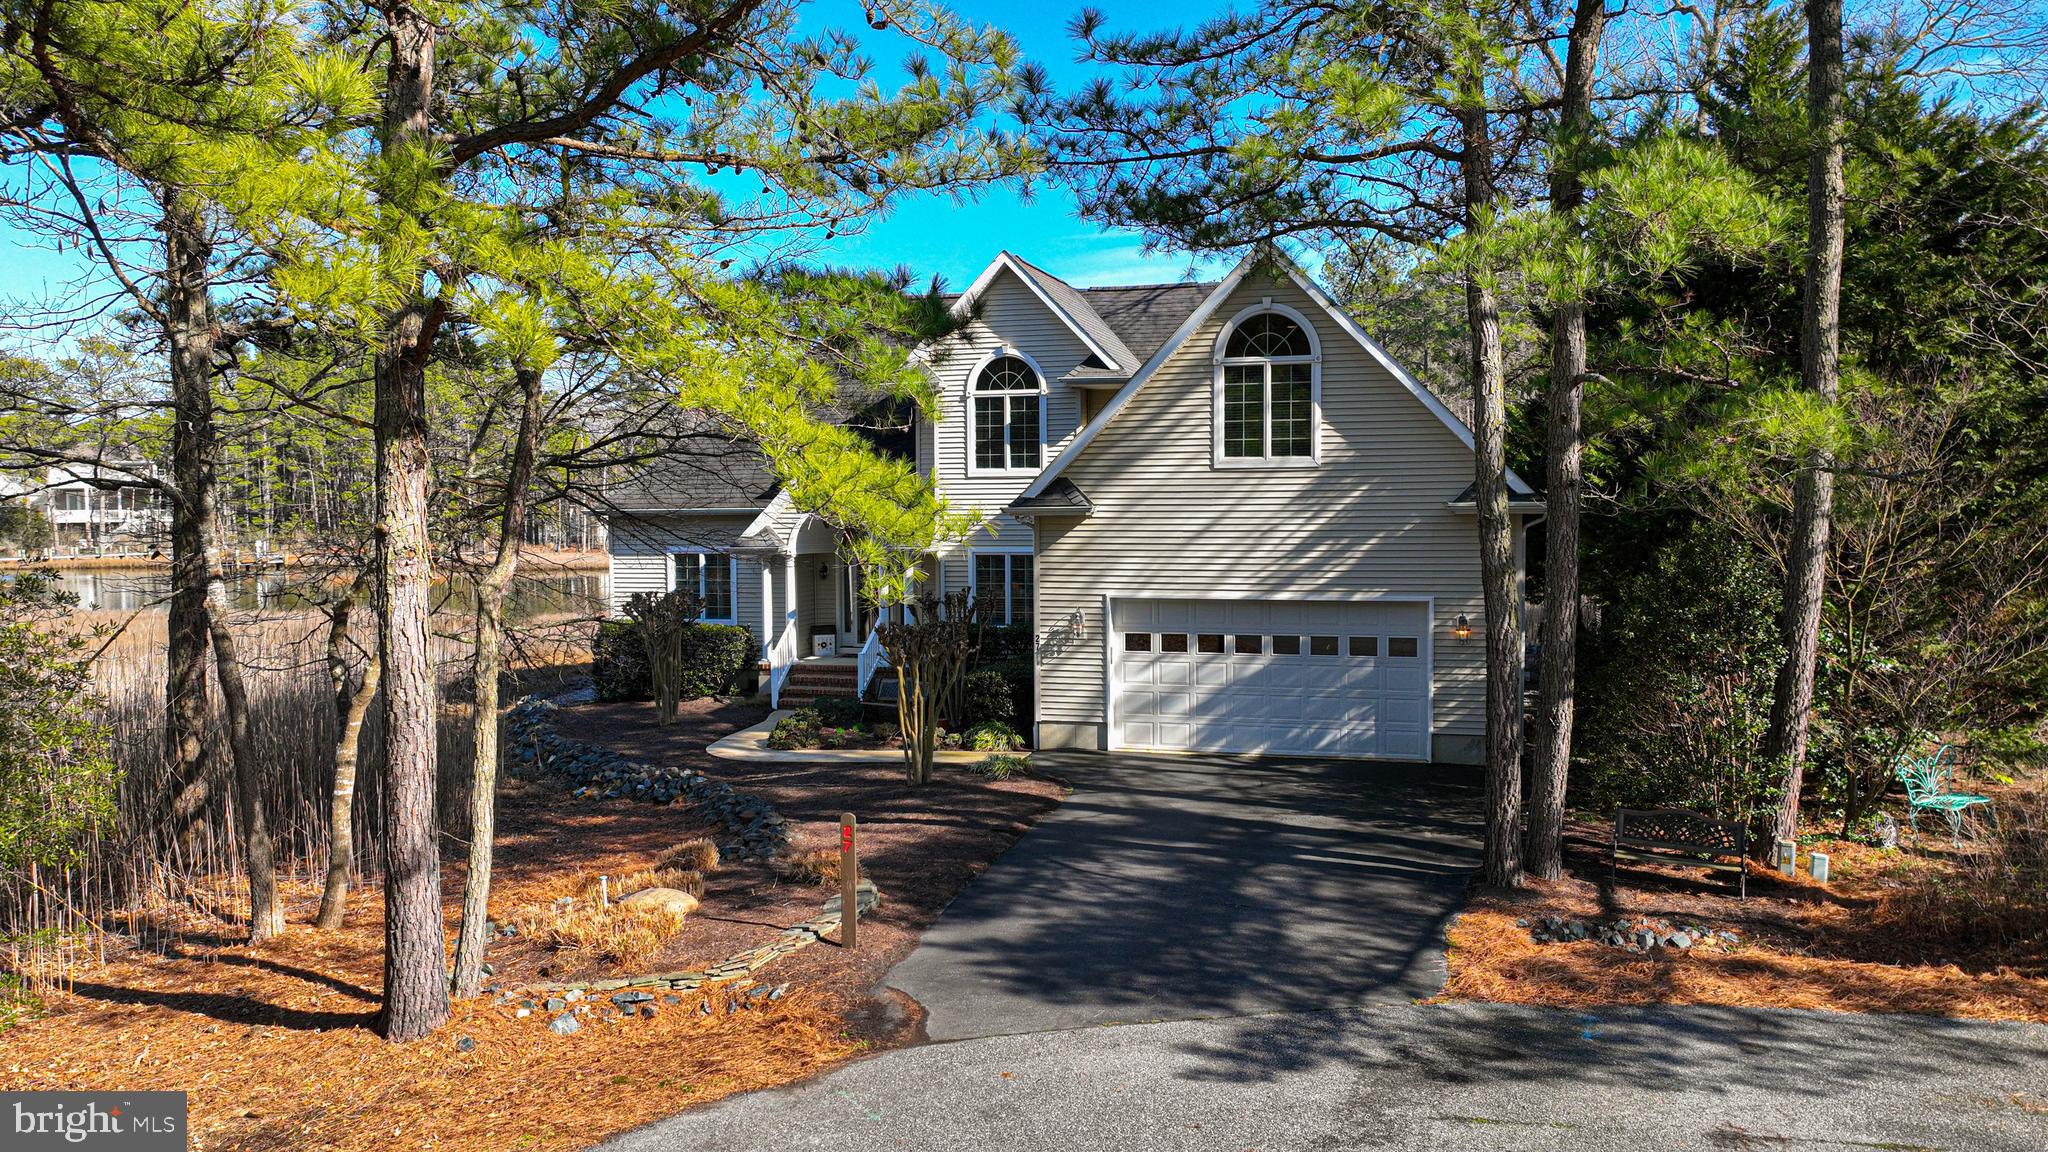 Enjoy tranquil views of Manklin Creek and marsh as you take in the natural beauty surrounding this waterfront home located in the Salt Grass Cove enclave of the Ocean Pines community.  The original owners worked with a reputable local builder (Beachwood) to create a custom design with great attention to detail and thoughtful planning. The living room is the heart of this home and offers water views, access to the screened porch and deck areas (overlooking the marsh & creek),  two sided fireplace, custom built-ins, and wet bar.   The adjacent kitchen with waterfront breakfast nook (w/ slider to deck) offers custom cabinetry & countertops, stainless appliances, pantry, and built-in work space.  The first floor owners suite offers water views, spacious en suite bathroom with double sink vanity, walk in shower w/ built-in shelves and seating & walk in closet with newer custom closet system.   The large dining room located by the front entry can double as a home office space and is equipped with additional outlets.  Upstairs you will find a 2nd floor landing that can serve multiple purposes, along with three guest rooms (one w/ private bath) and additional guest bathroom.  Plenty of storage throughout this home including thoughtfully placed eave storage access in multiple locations upstairs, oversized closets, and pull down attic access.  Walk through the laundry room to the attached garage where you can store your vehicles AND still have room for workspace, shelving as well as extra fridge & utility sink.  The oversized lot (.41 acre) is located on a cul-de-sac with water frontage on Manklin Creek, the perfect spot to launch your canoe or kayak.  This lot requires little yard maintenance thanks to lovely mulch beds, extensive hardscaping, rip rap perimeter on creek/marsh sides and natural marsh grasses that line the side yard.  Ocean Pines is a GREAT community-  the perfect place  for a second home OR year-round residence.  It offers low HOA fees ($896/yr) and a la cart